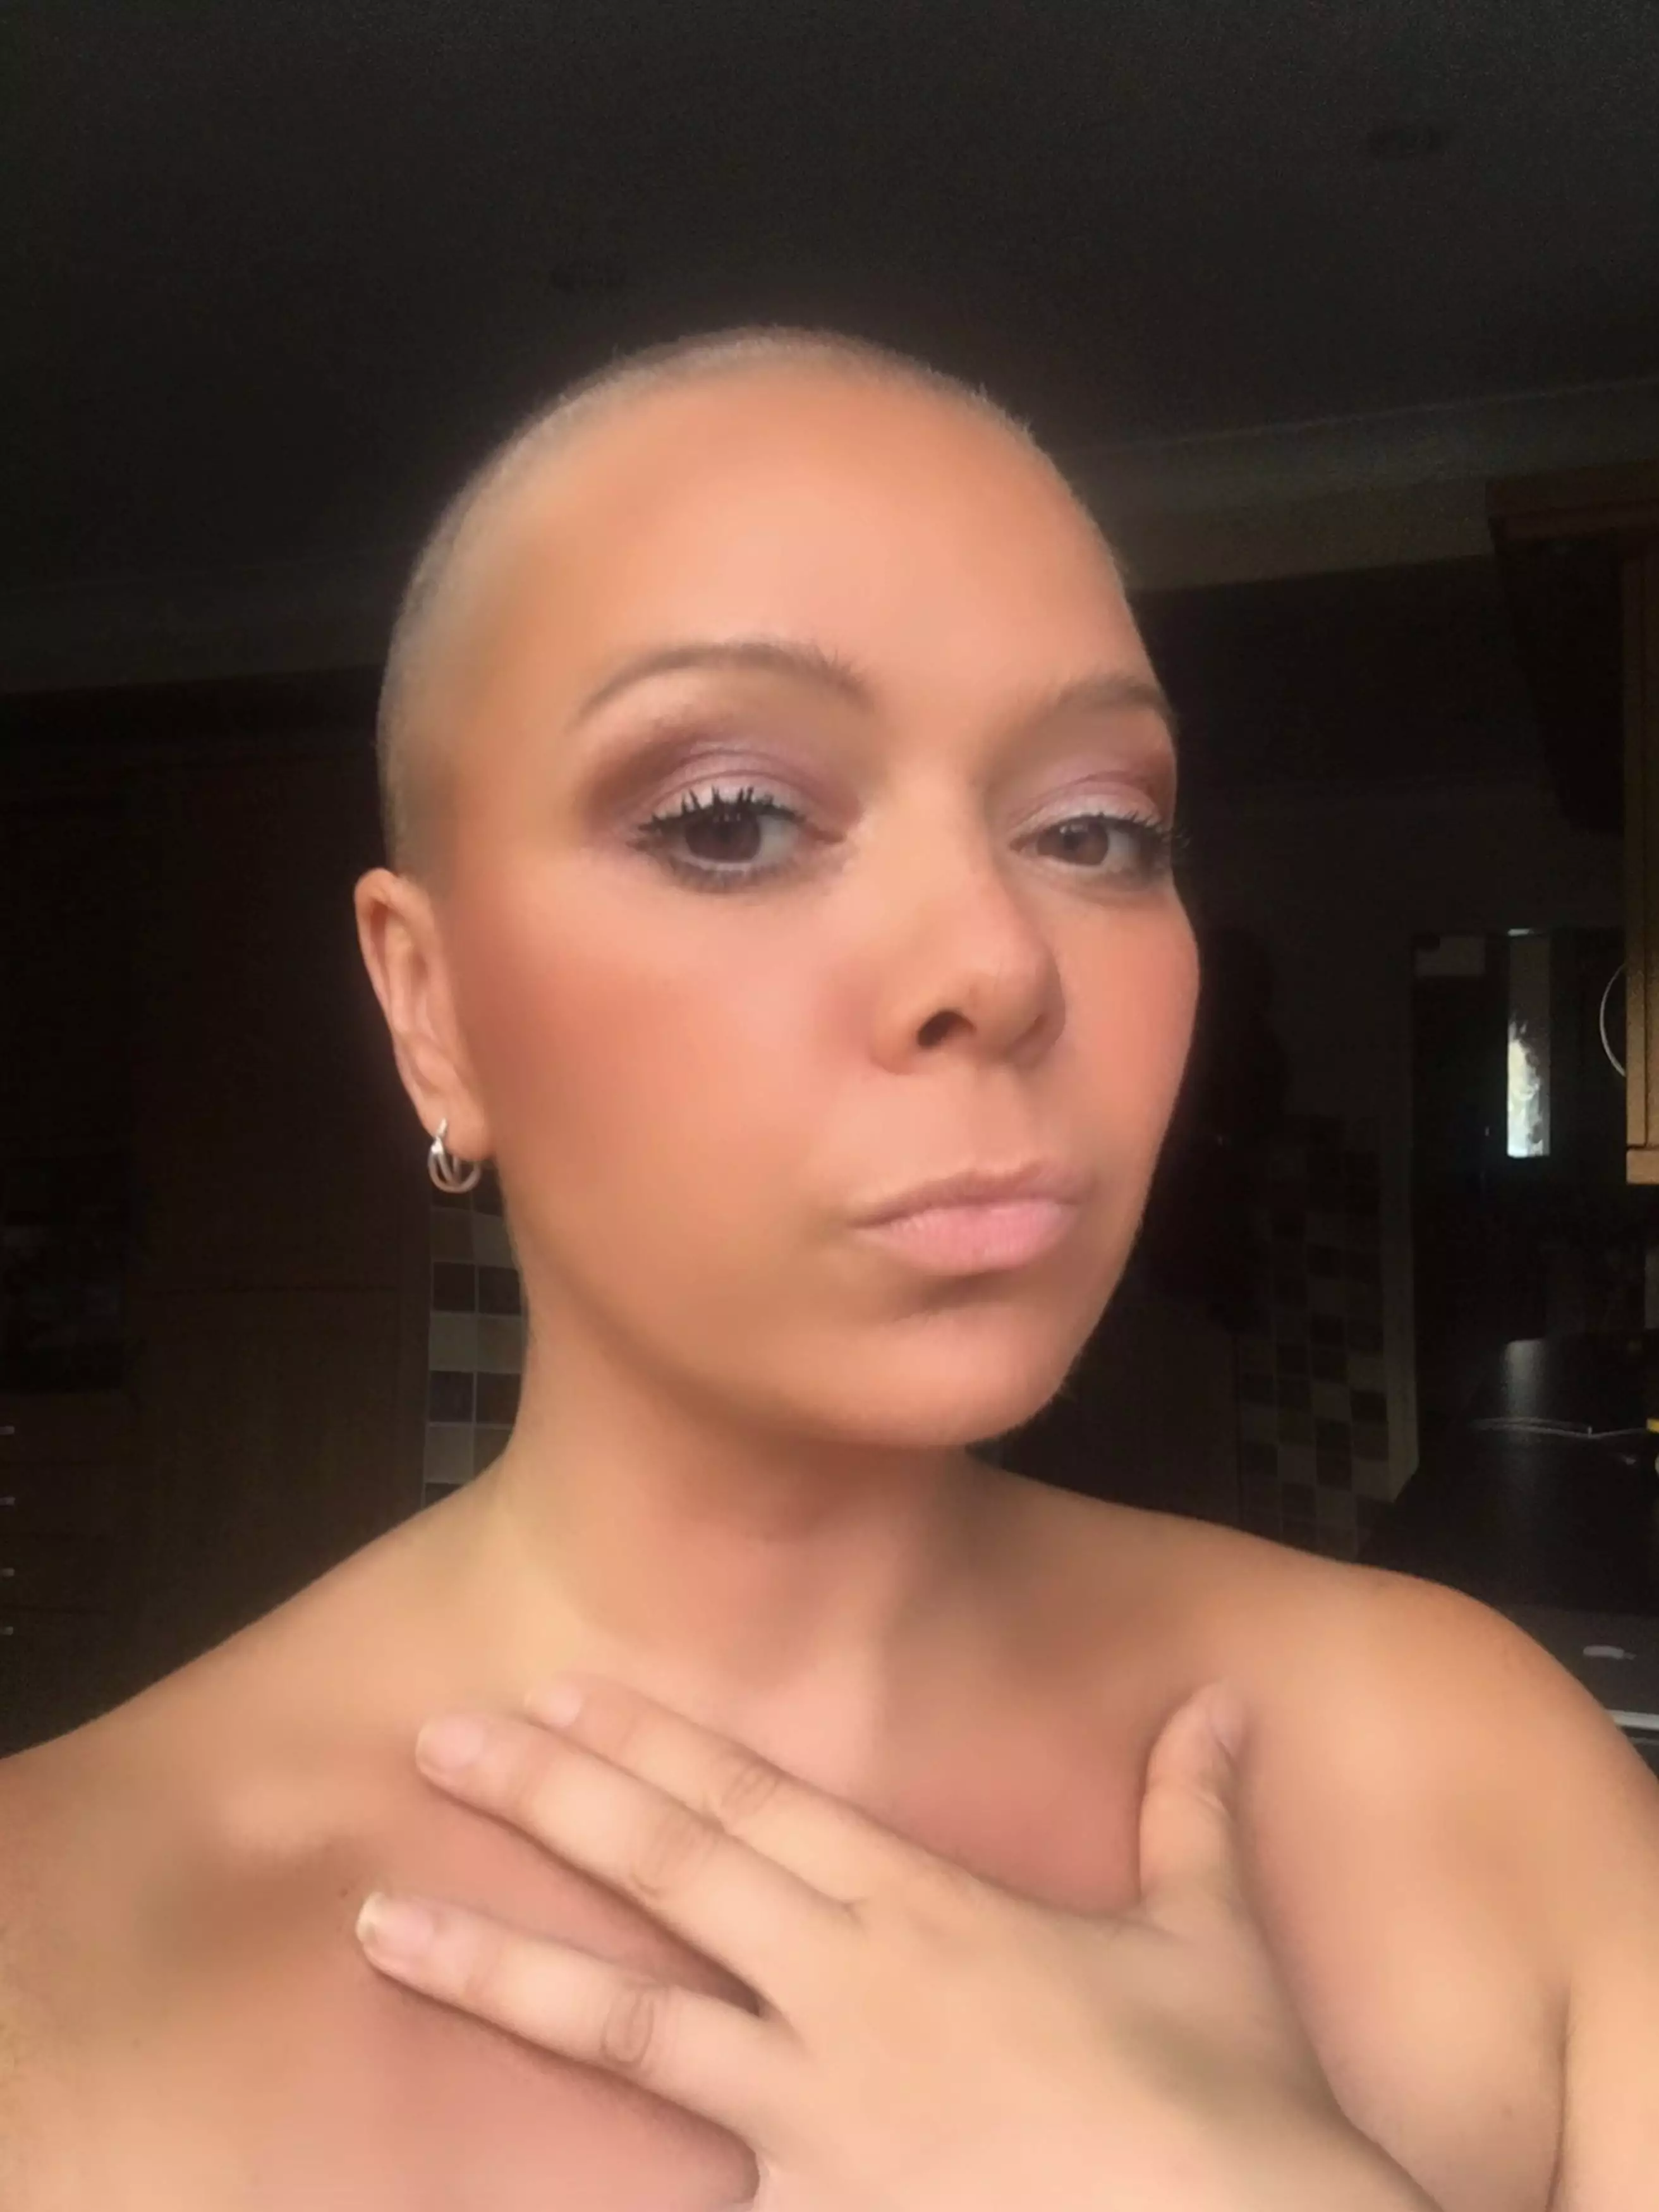 Donia is a breast cancer survivor and she waited for her hair to grow back (